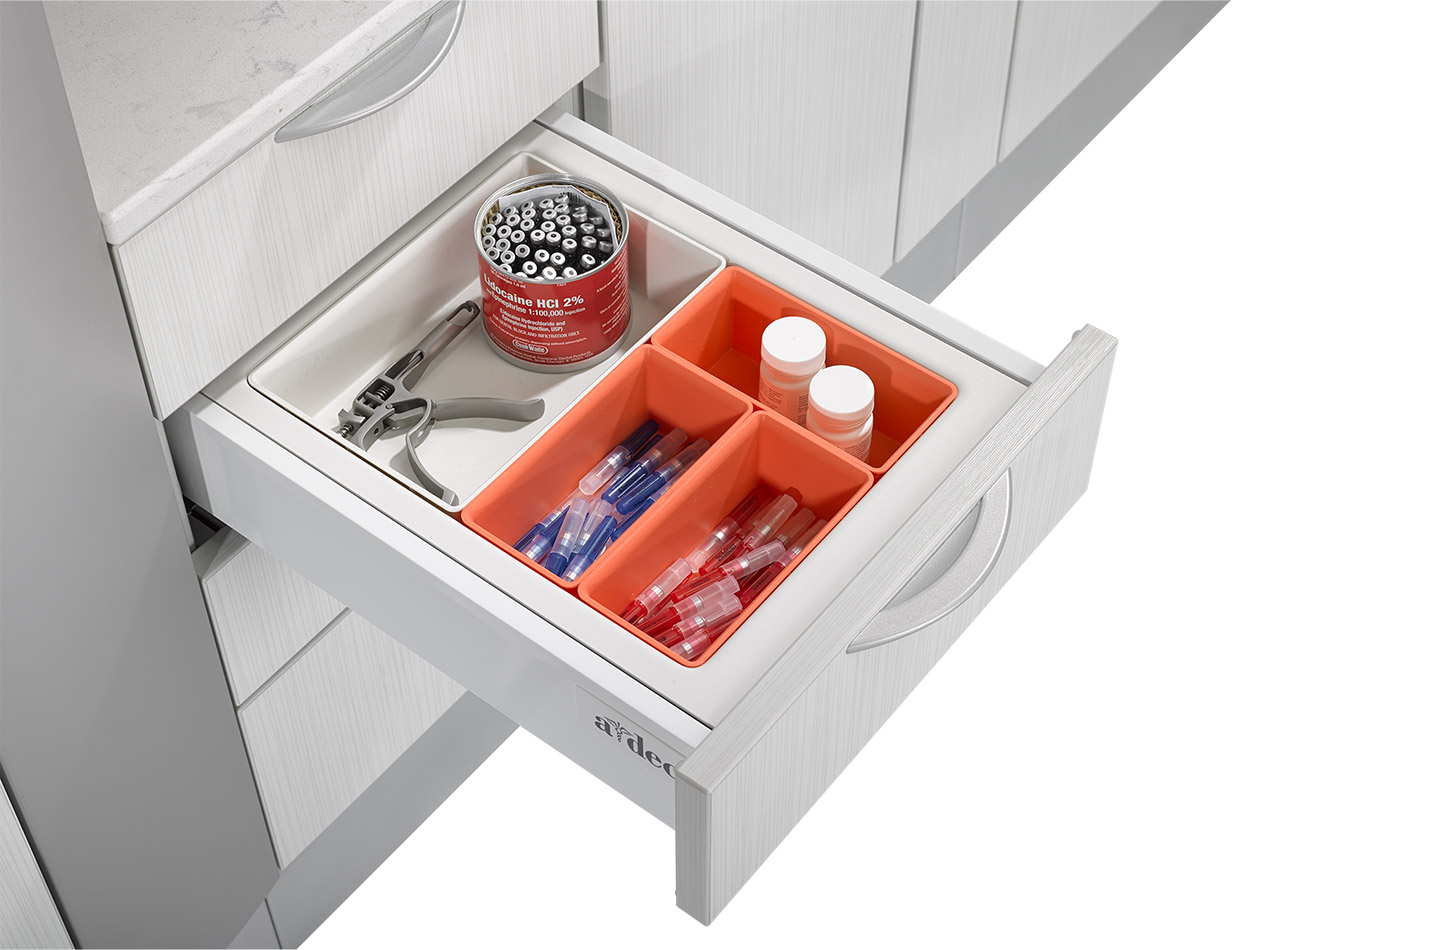 A-dec Inspire 592 central console pull-out drawer